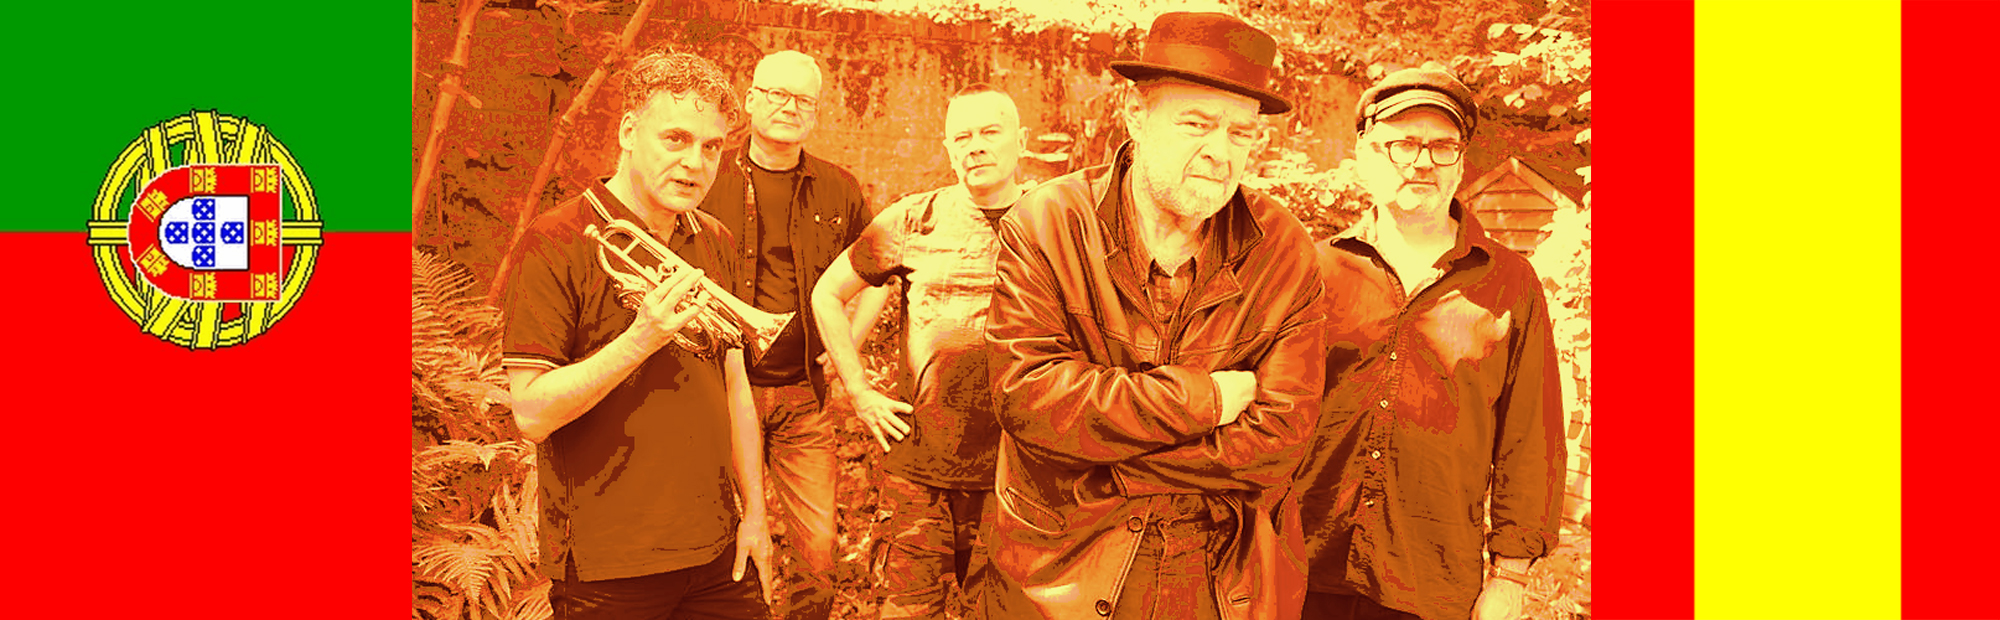 Pere Ubu moon unit in Portugal and Spain